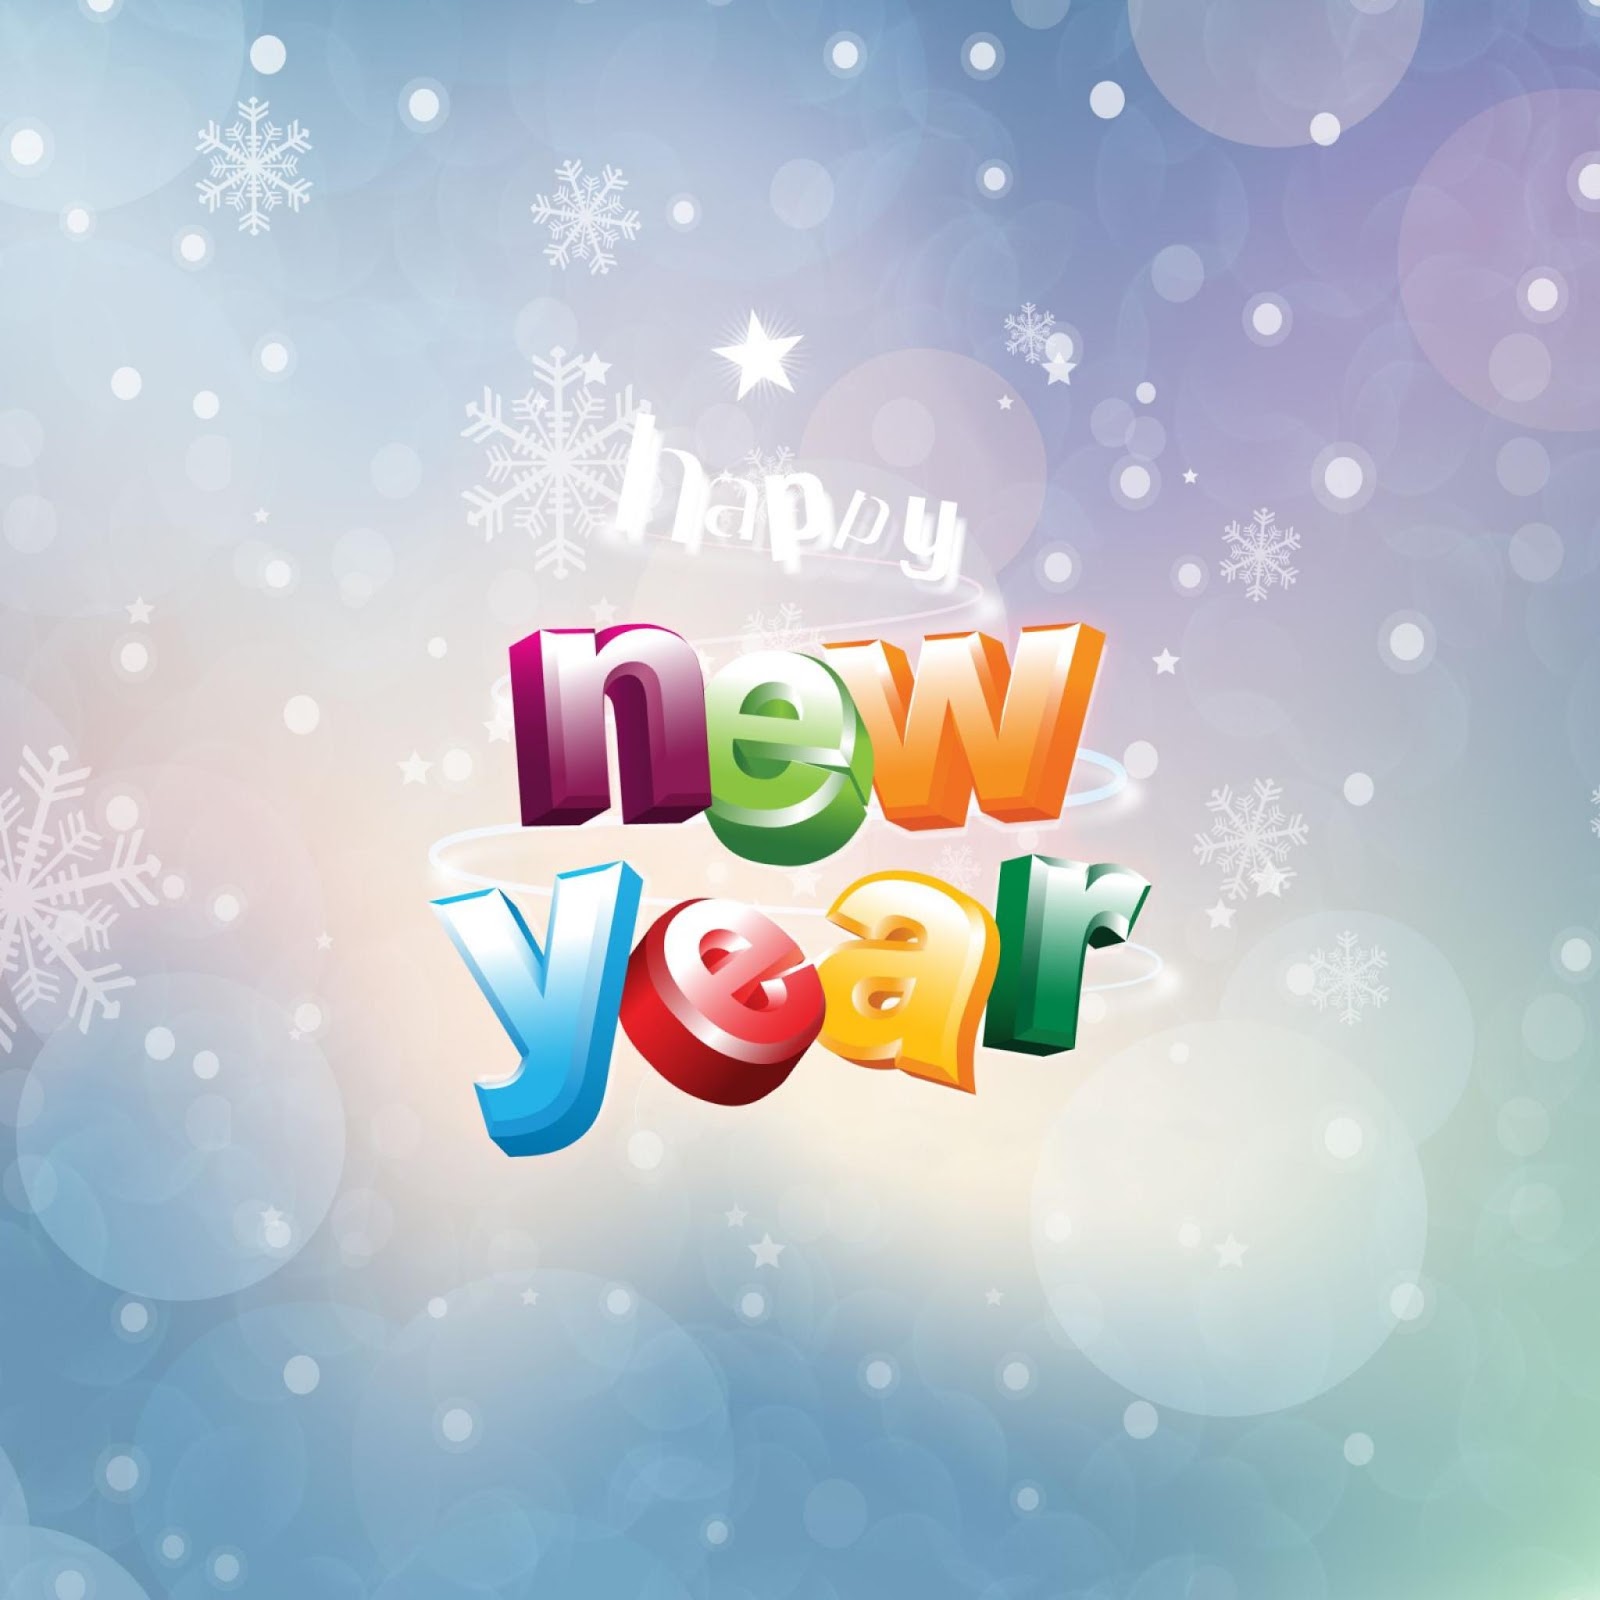 iPad Wallpapers: Free Download New Year 2013 iPad Wallpapers 2048x2048